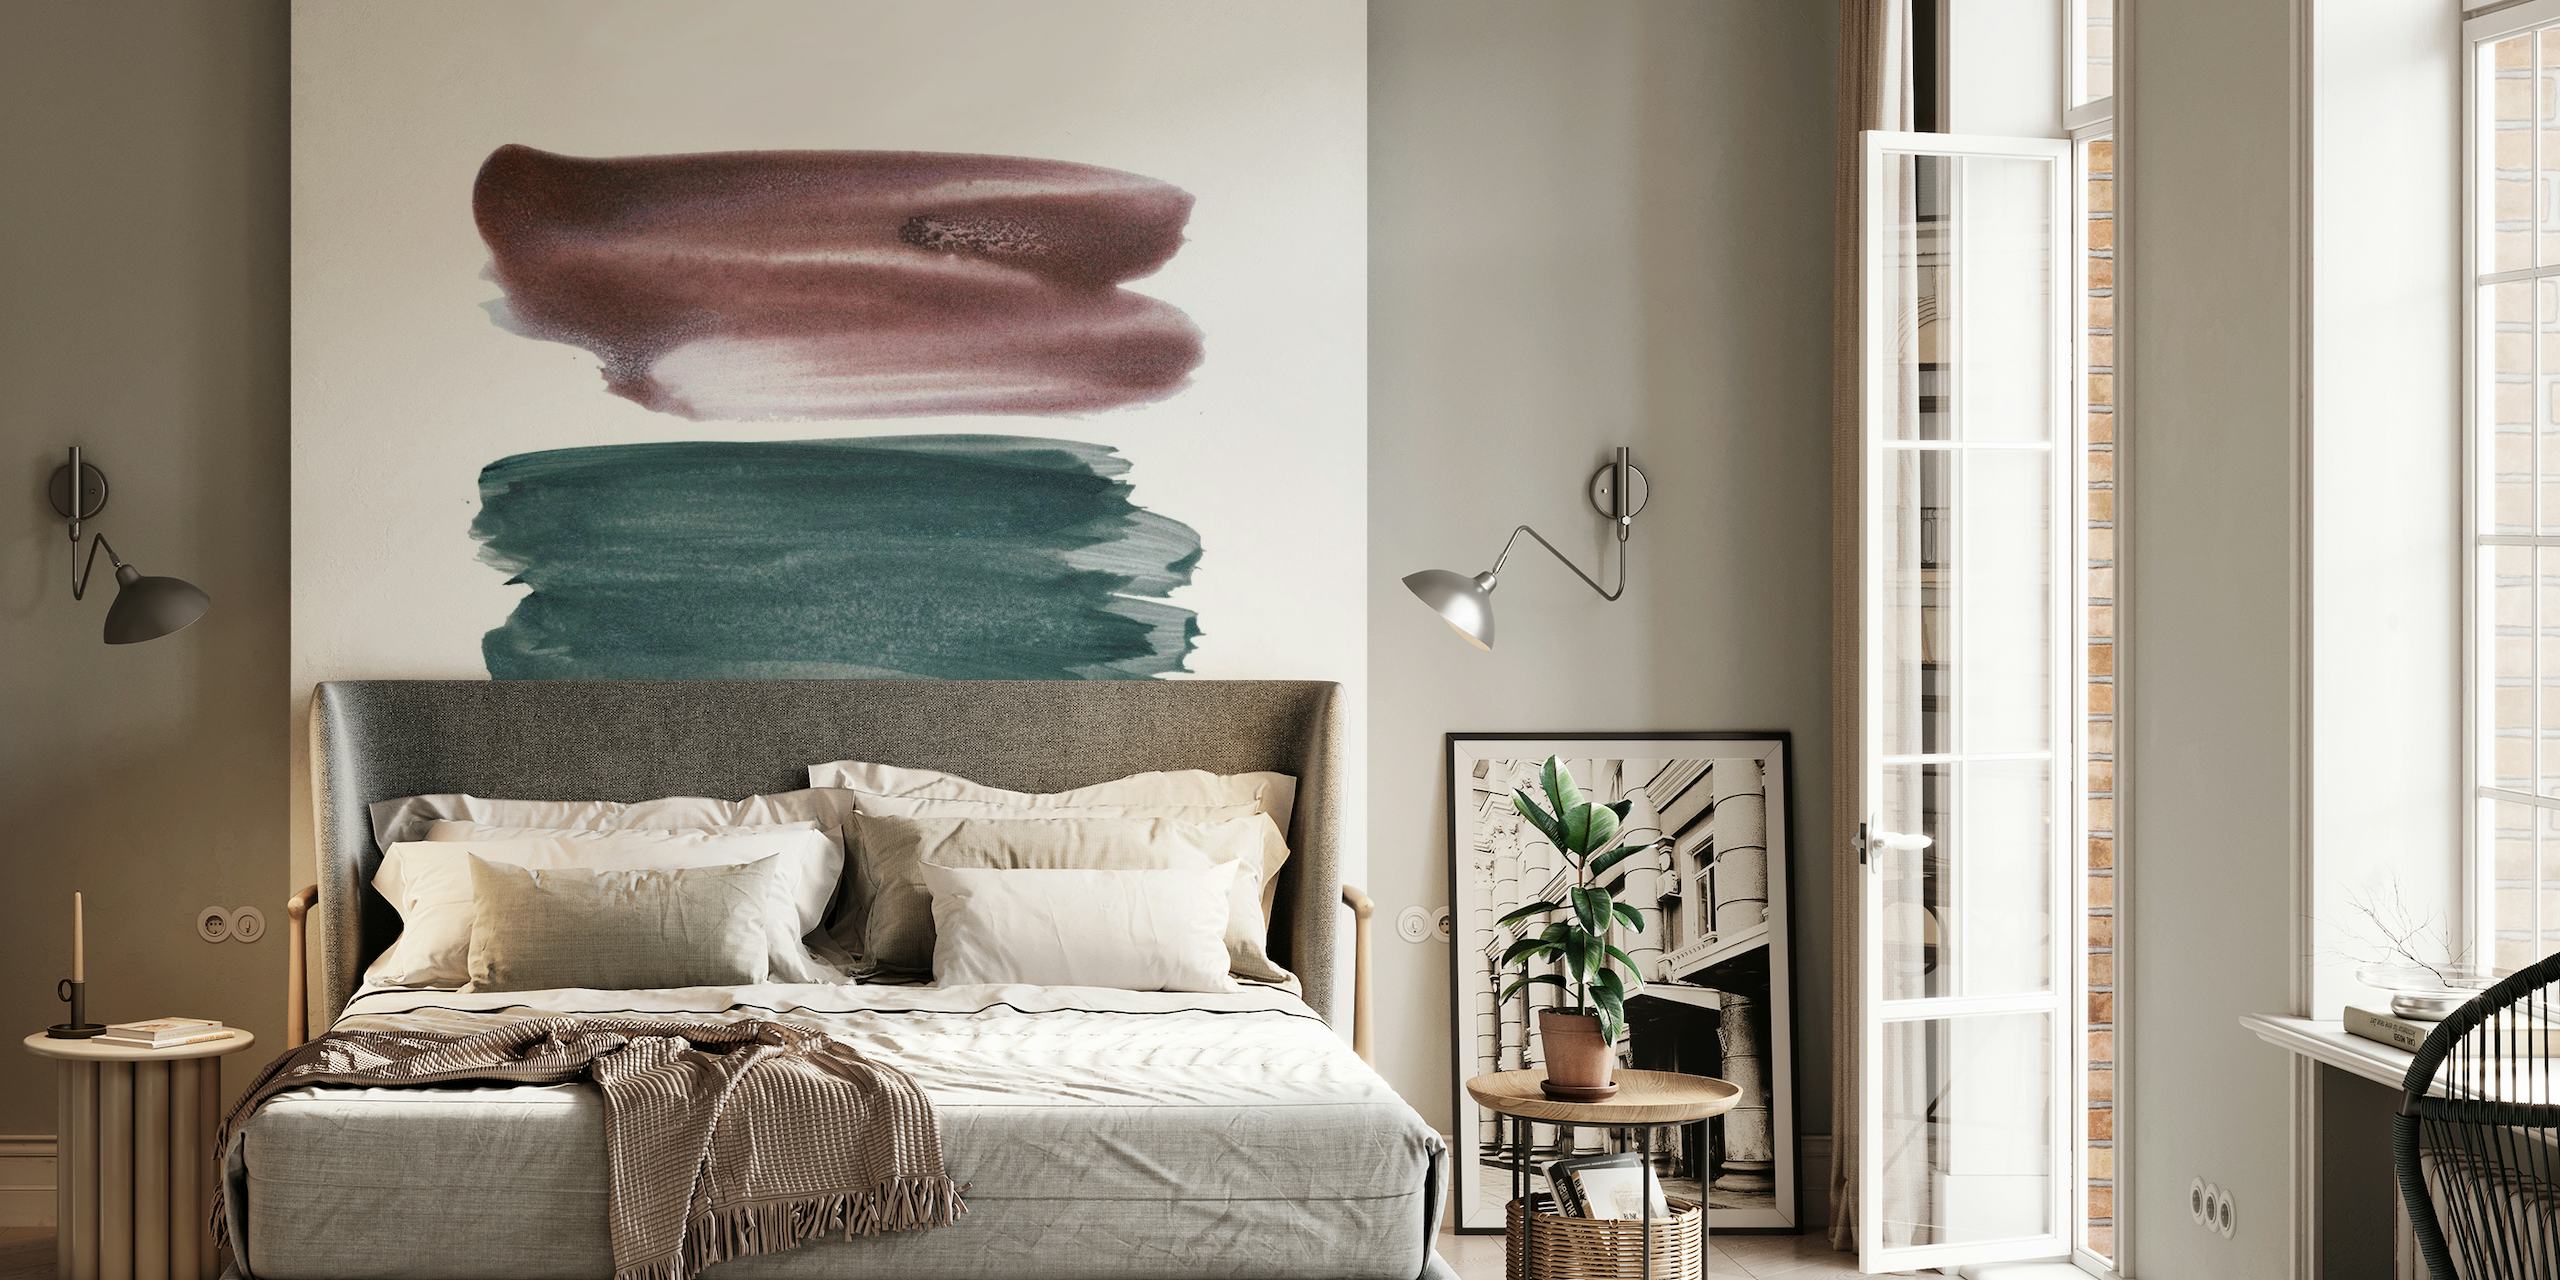 Abstract brushstrokes wall mural in muted colors